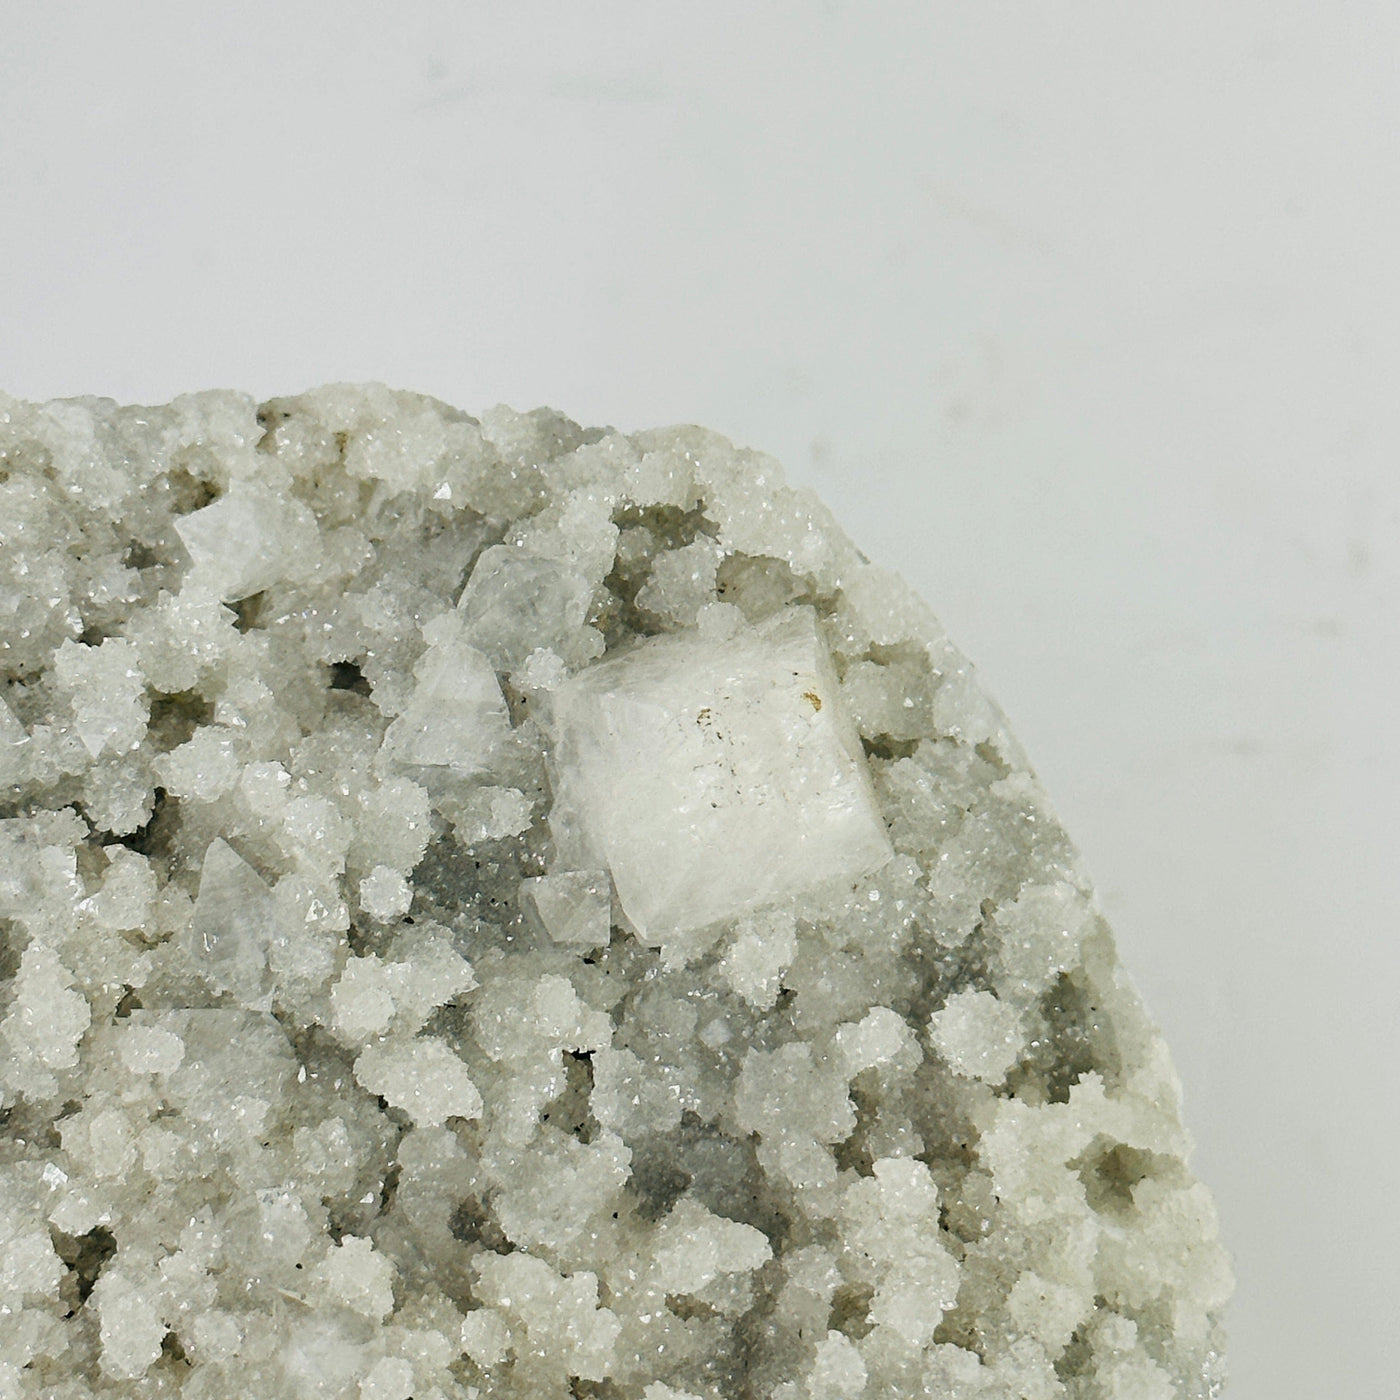 up close shot of zeolite with apophyllite 